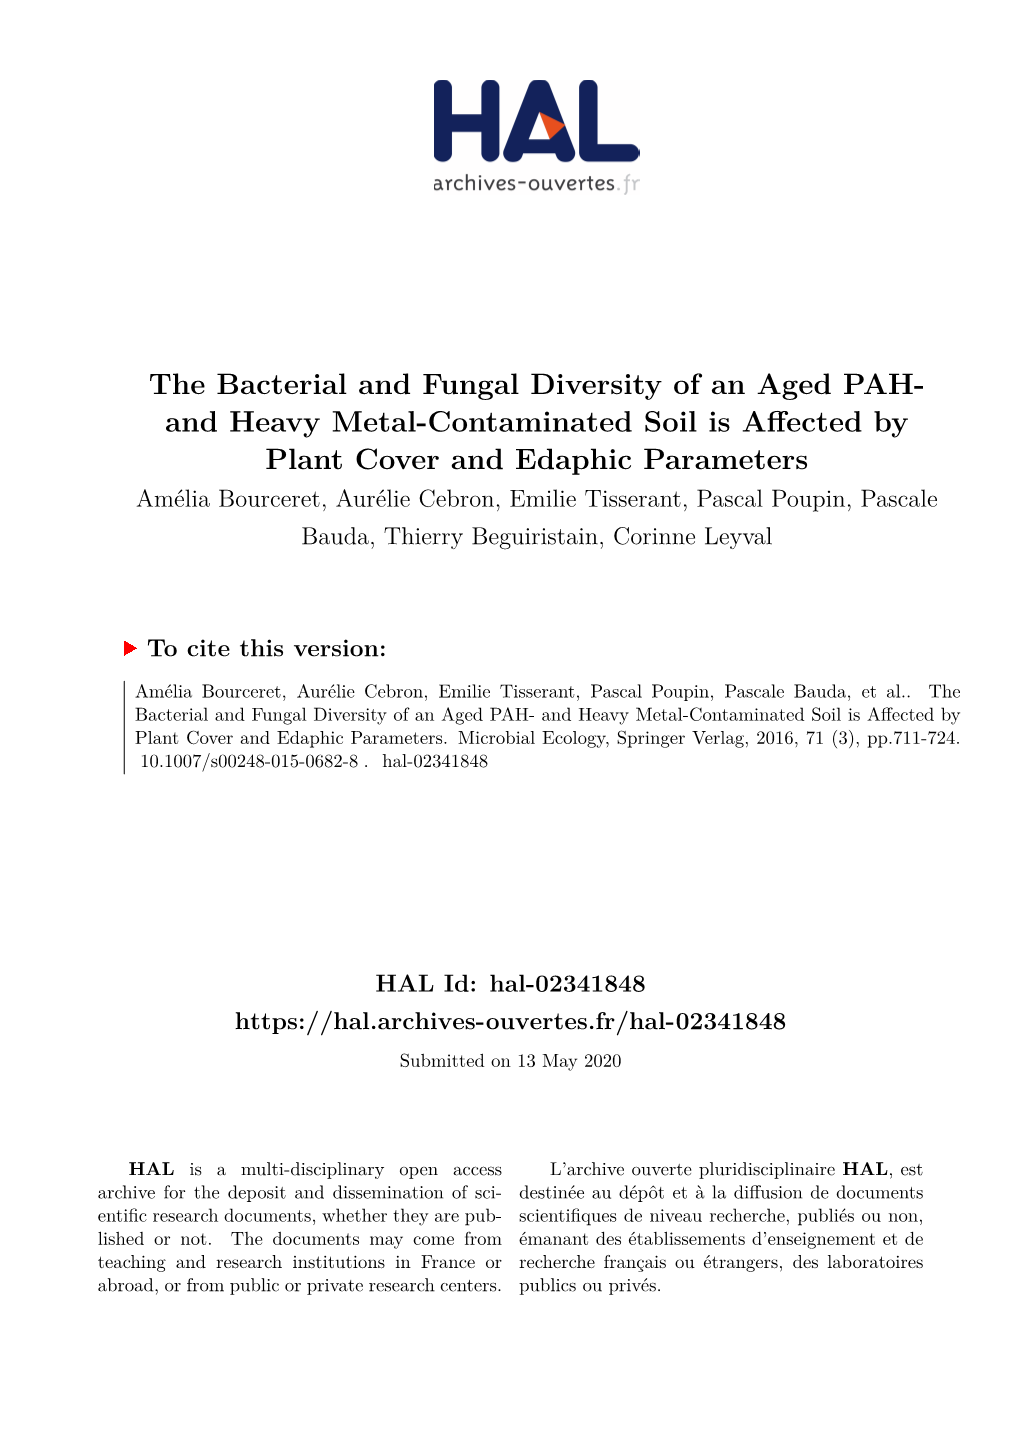 The Bacterial and Fungal Diversity of an Aged